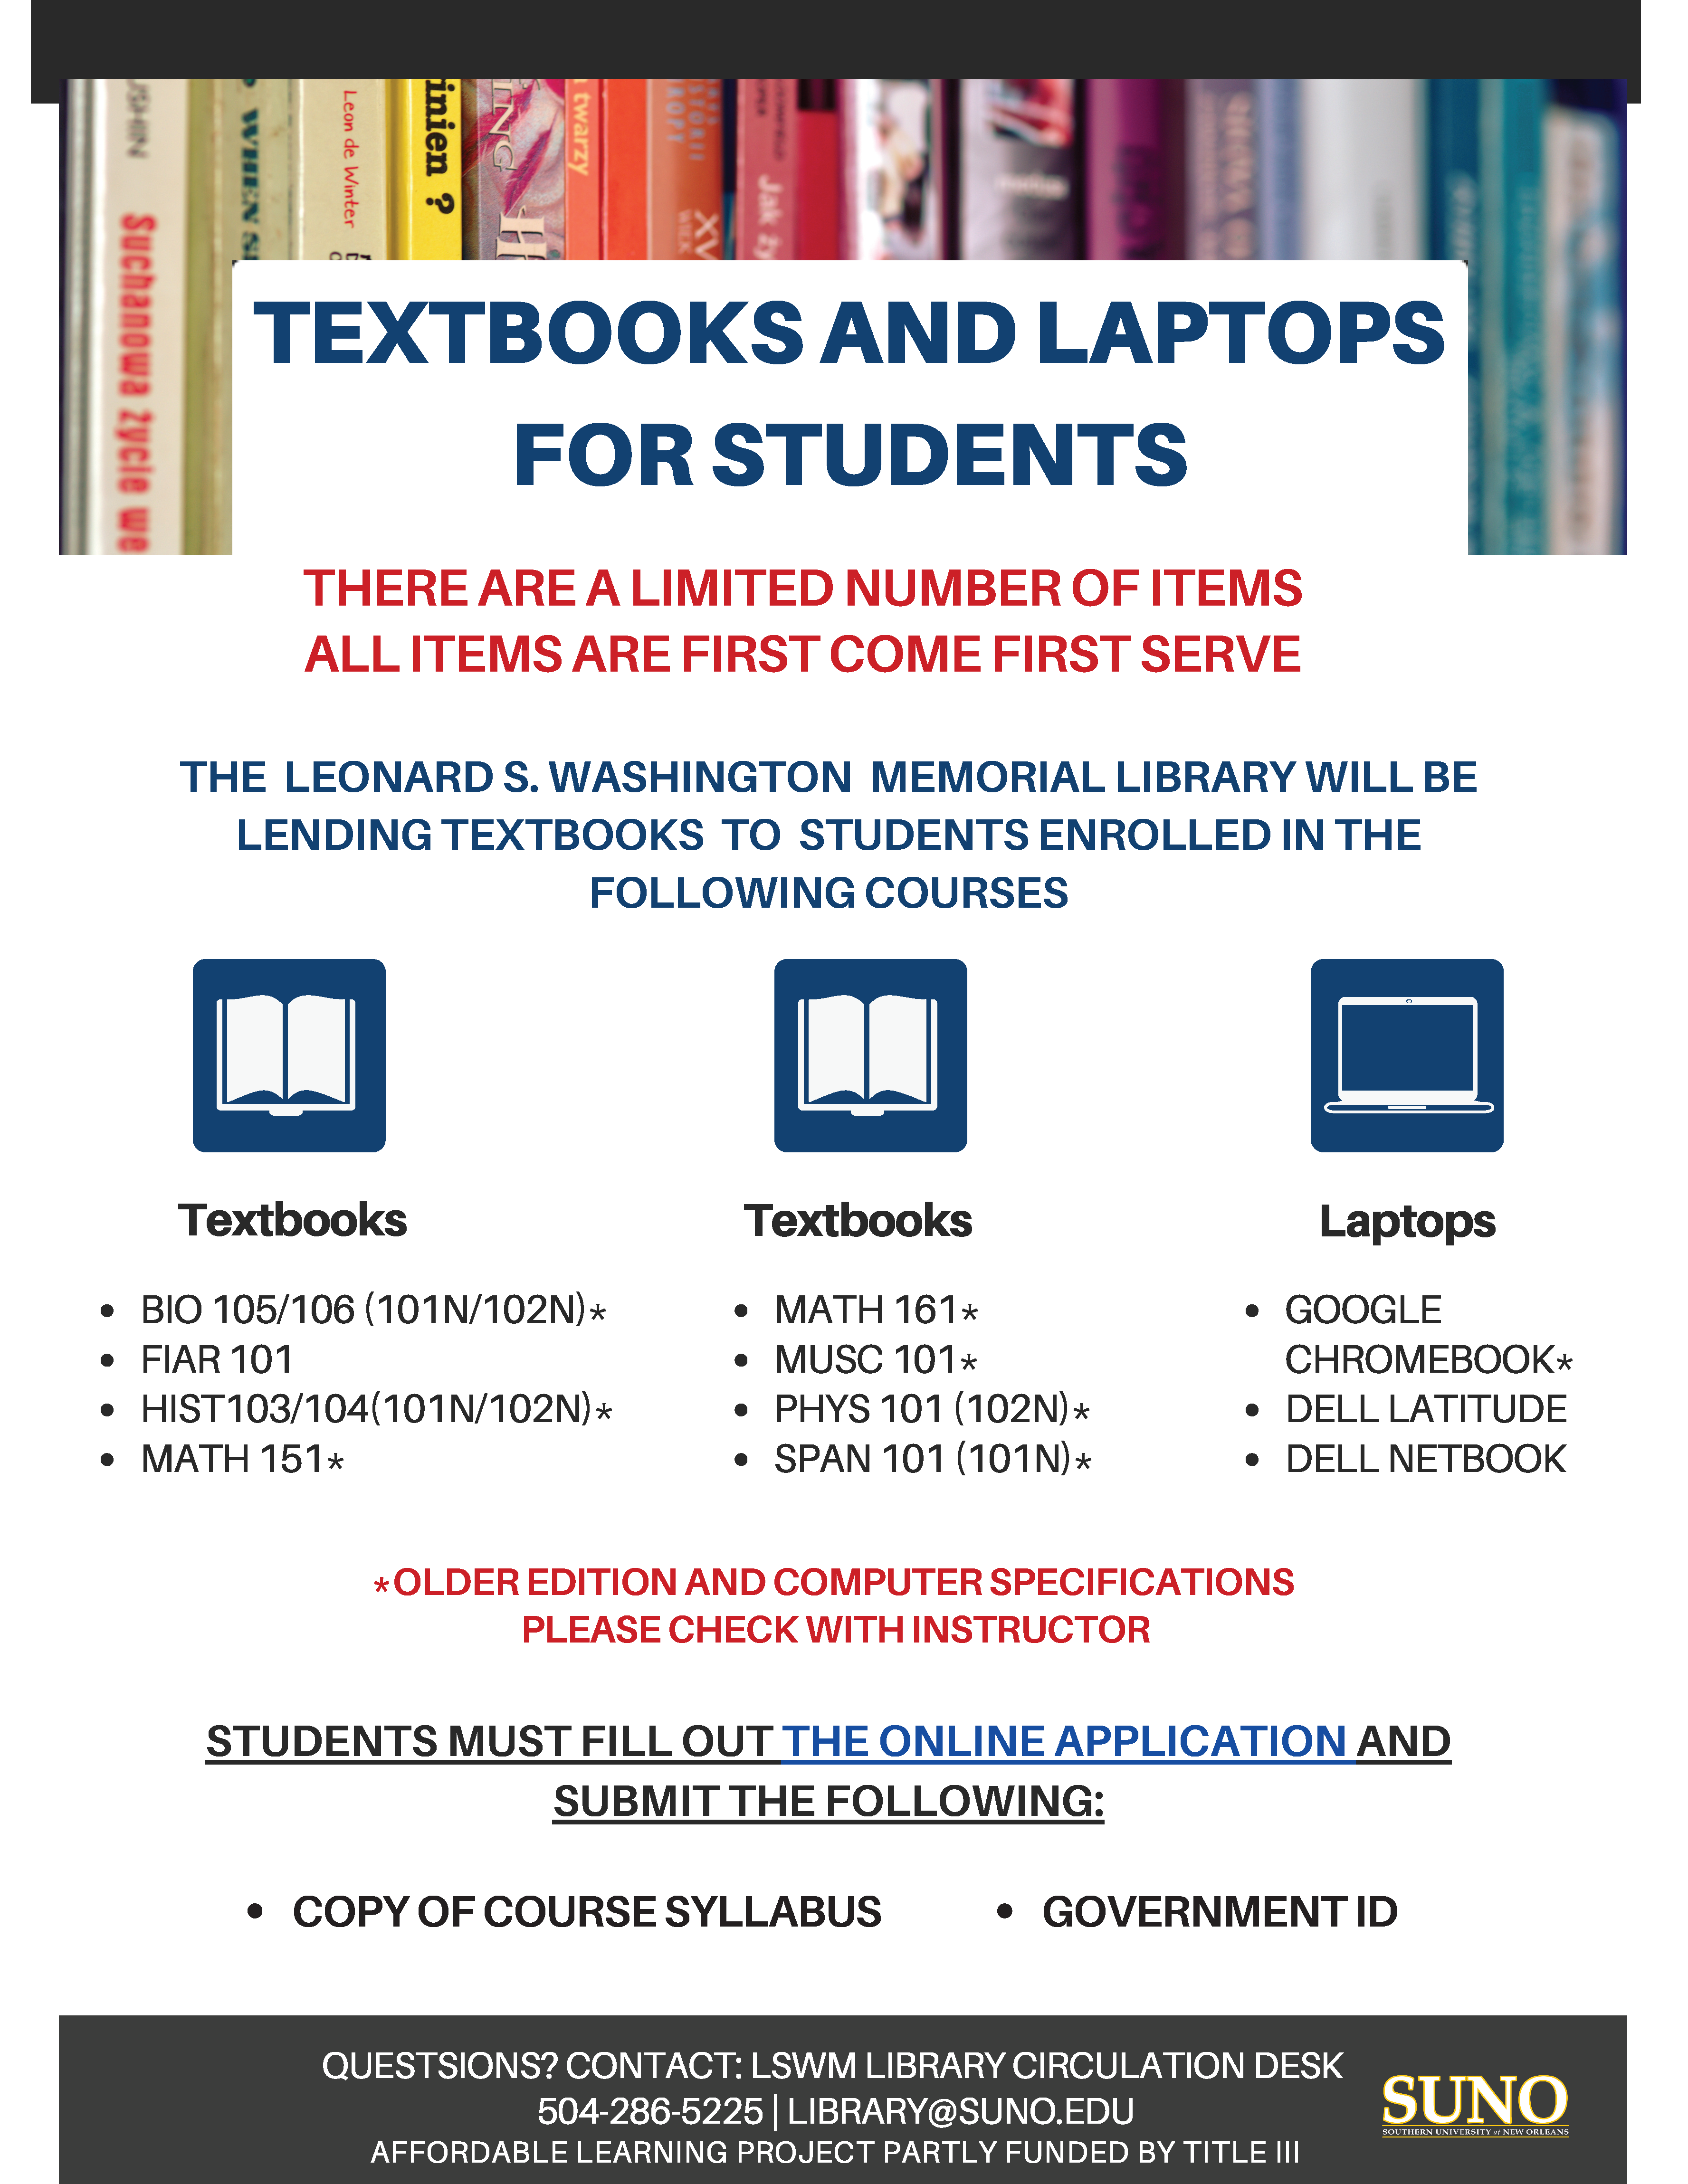 Textbook and Laptops for Students